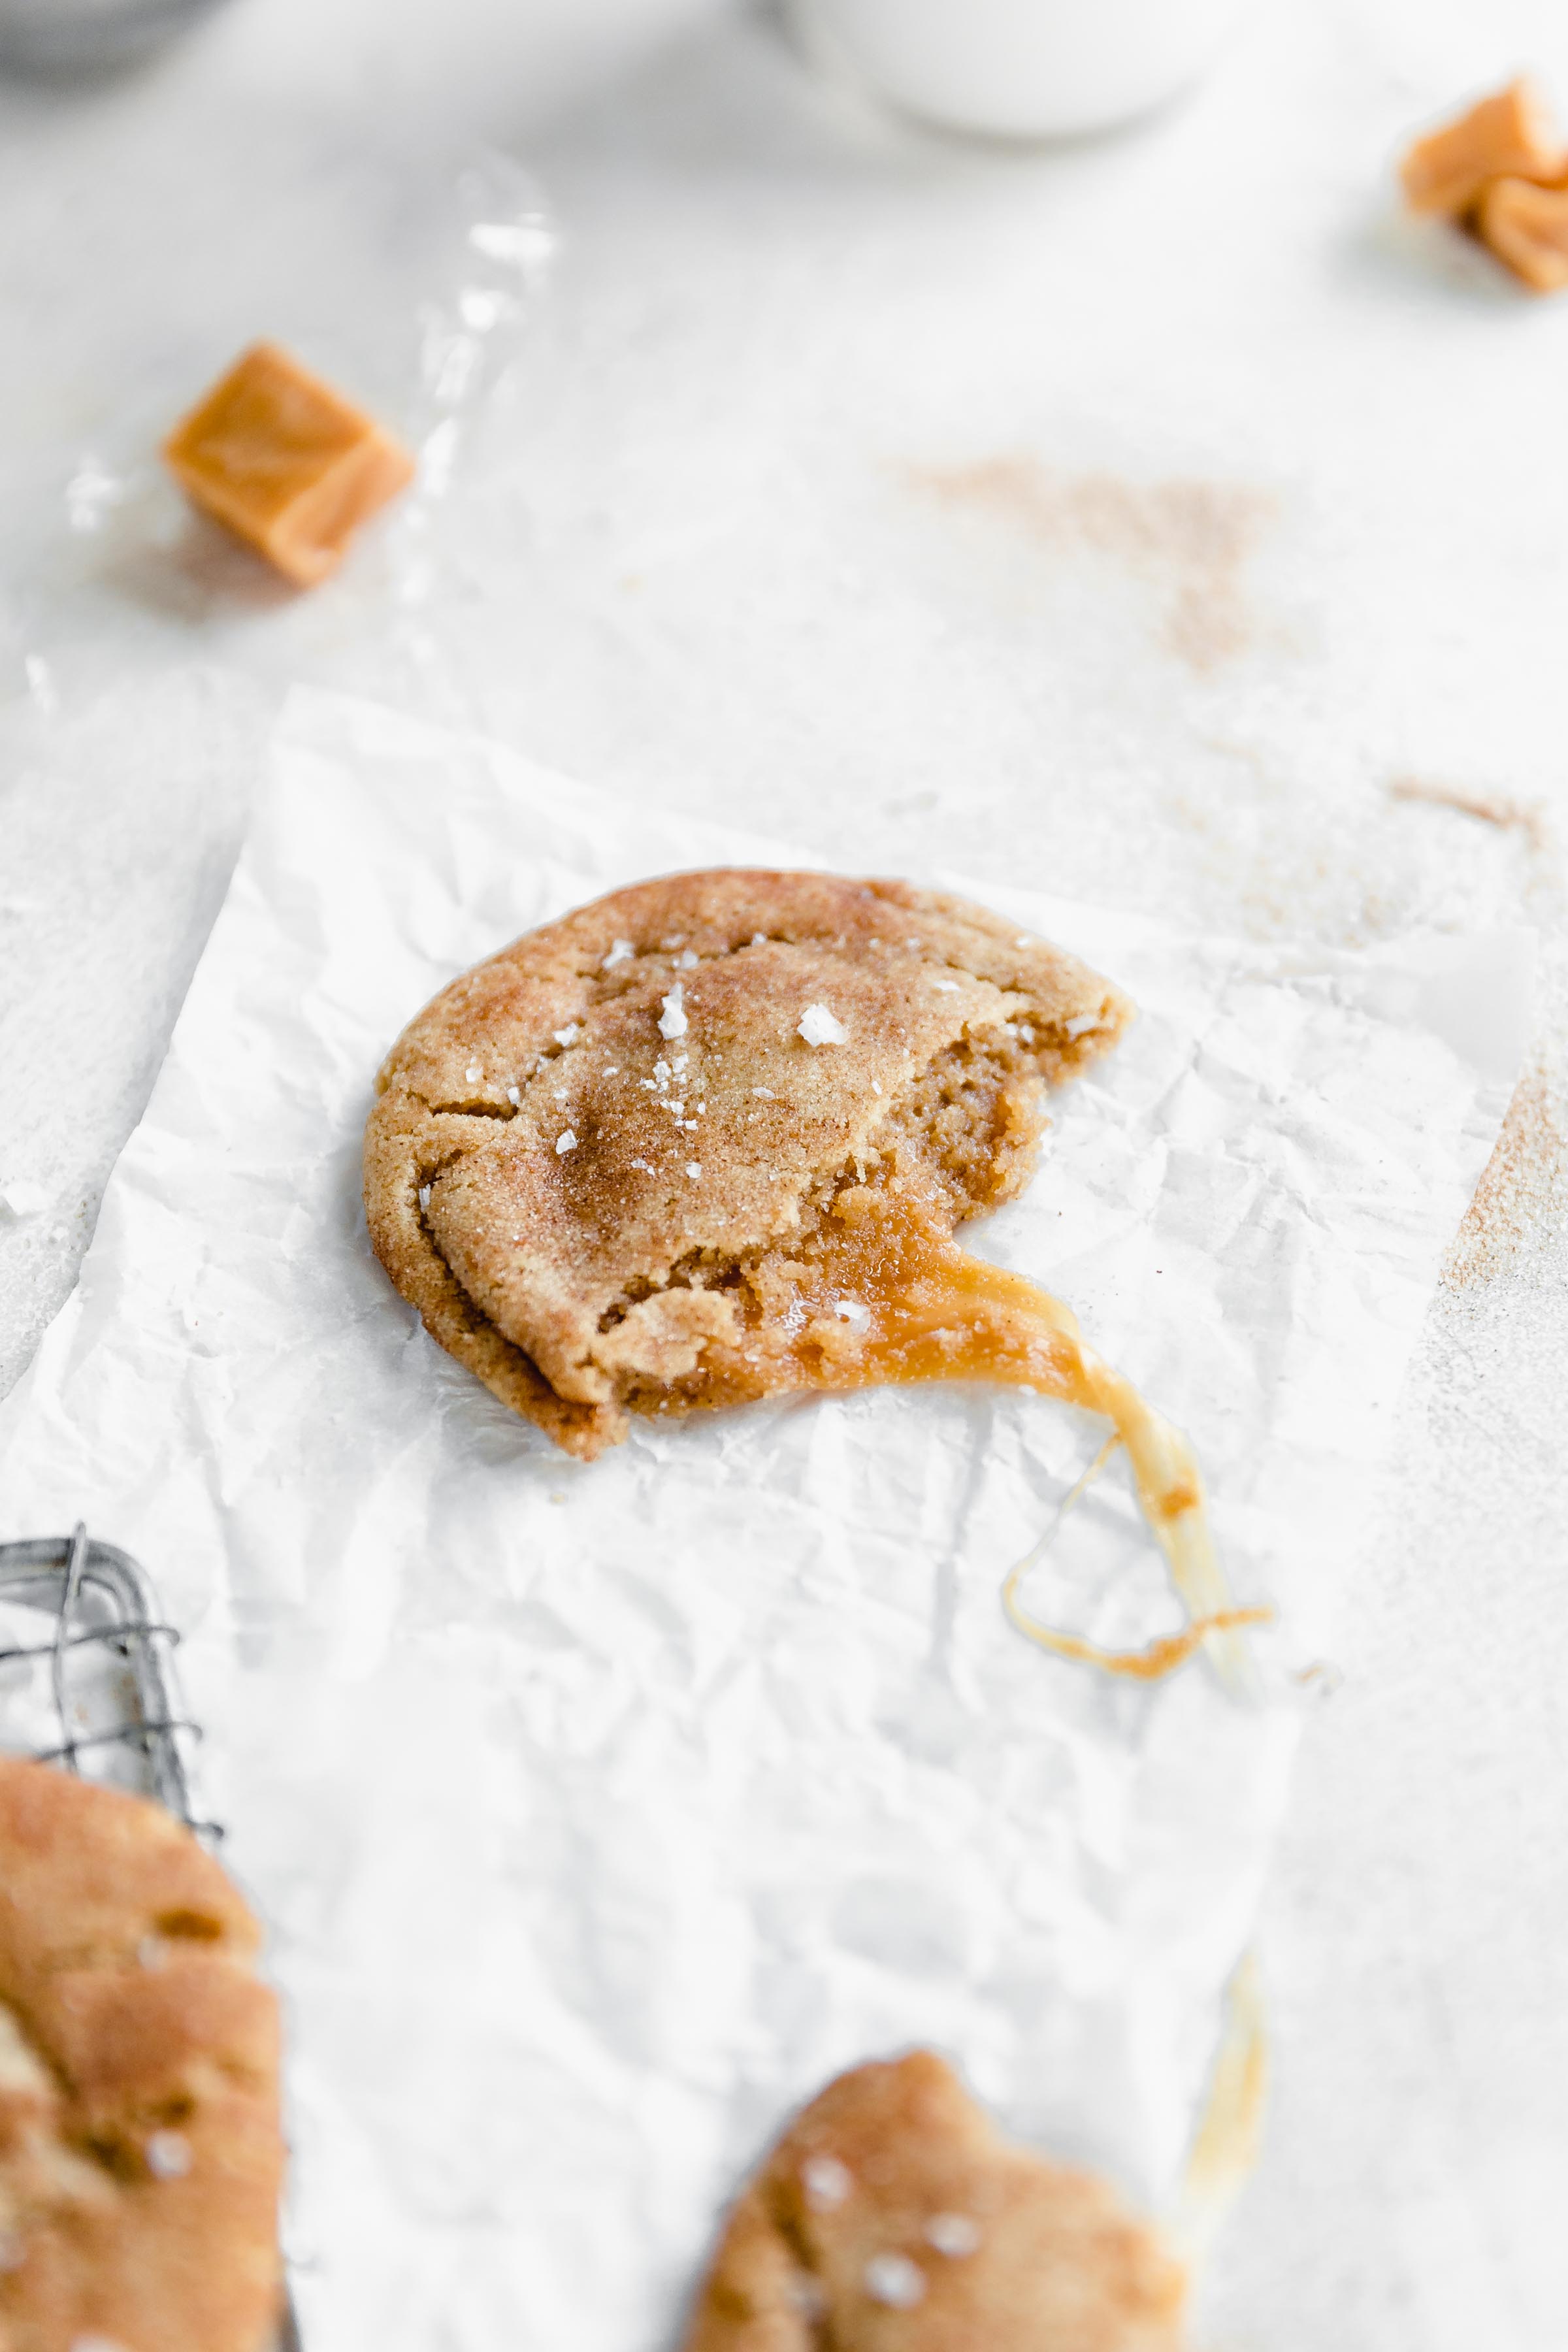 These sinfully delicious caramel stuffed snickerdoodles are our new favorite cookie